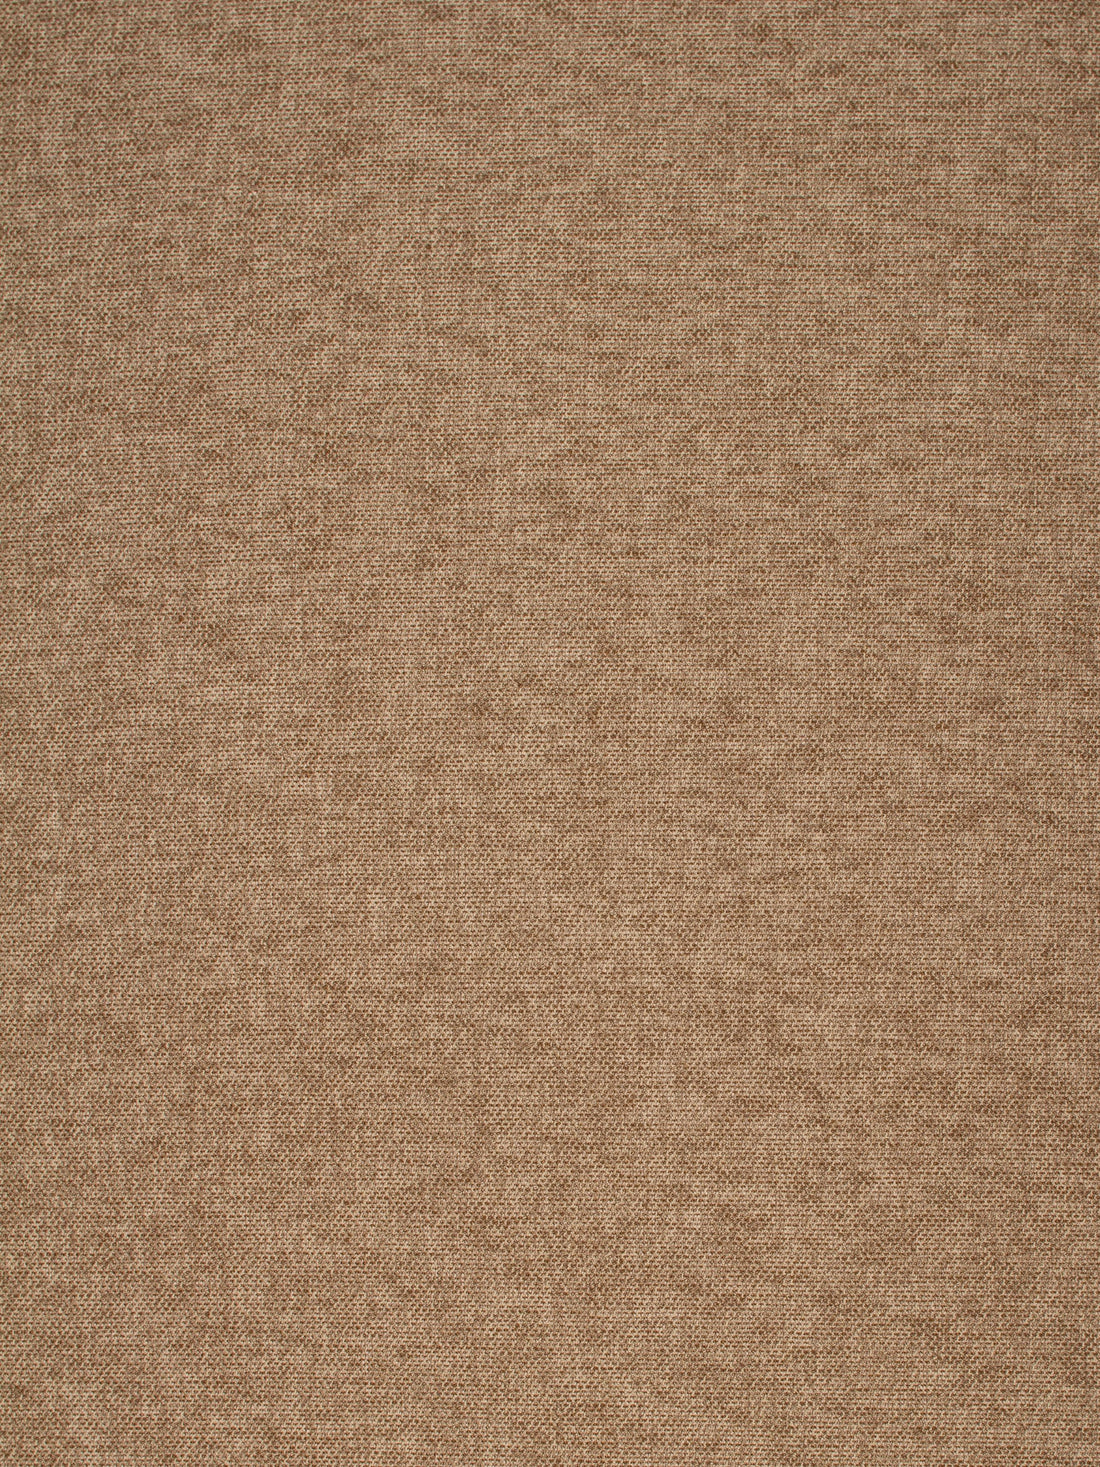 Sierra Oww fabric in wheat field color - pattern number PN 05121090 - by Scalamandre in the Old World Weavers collection